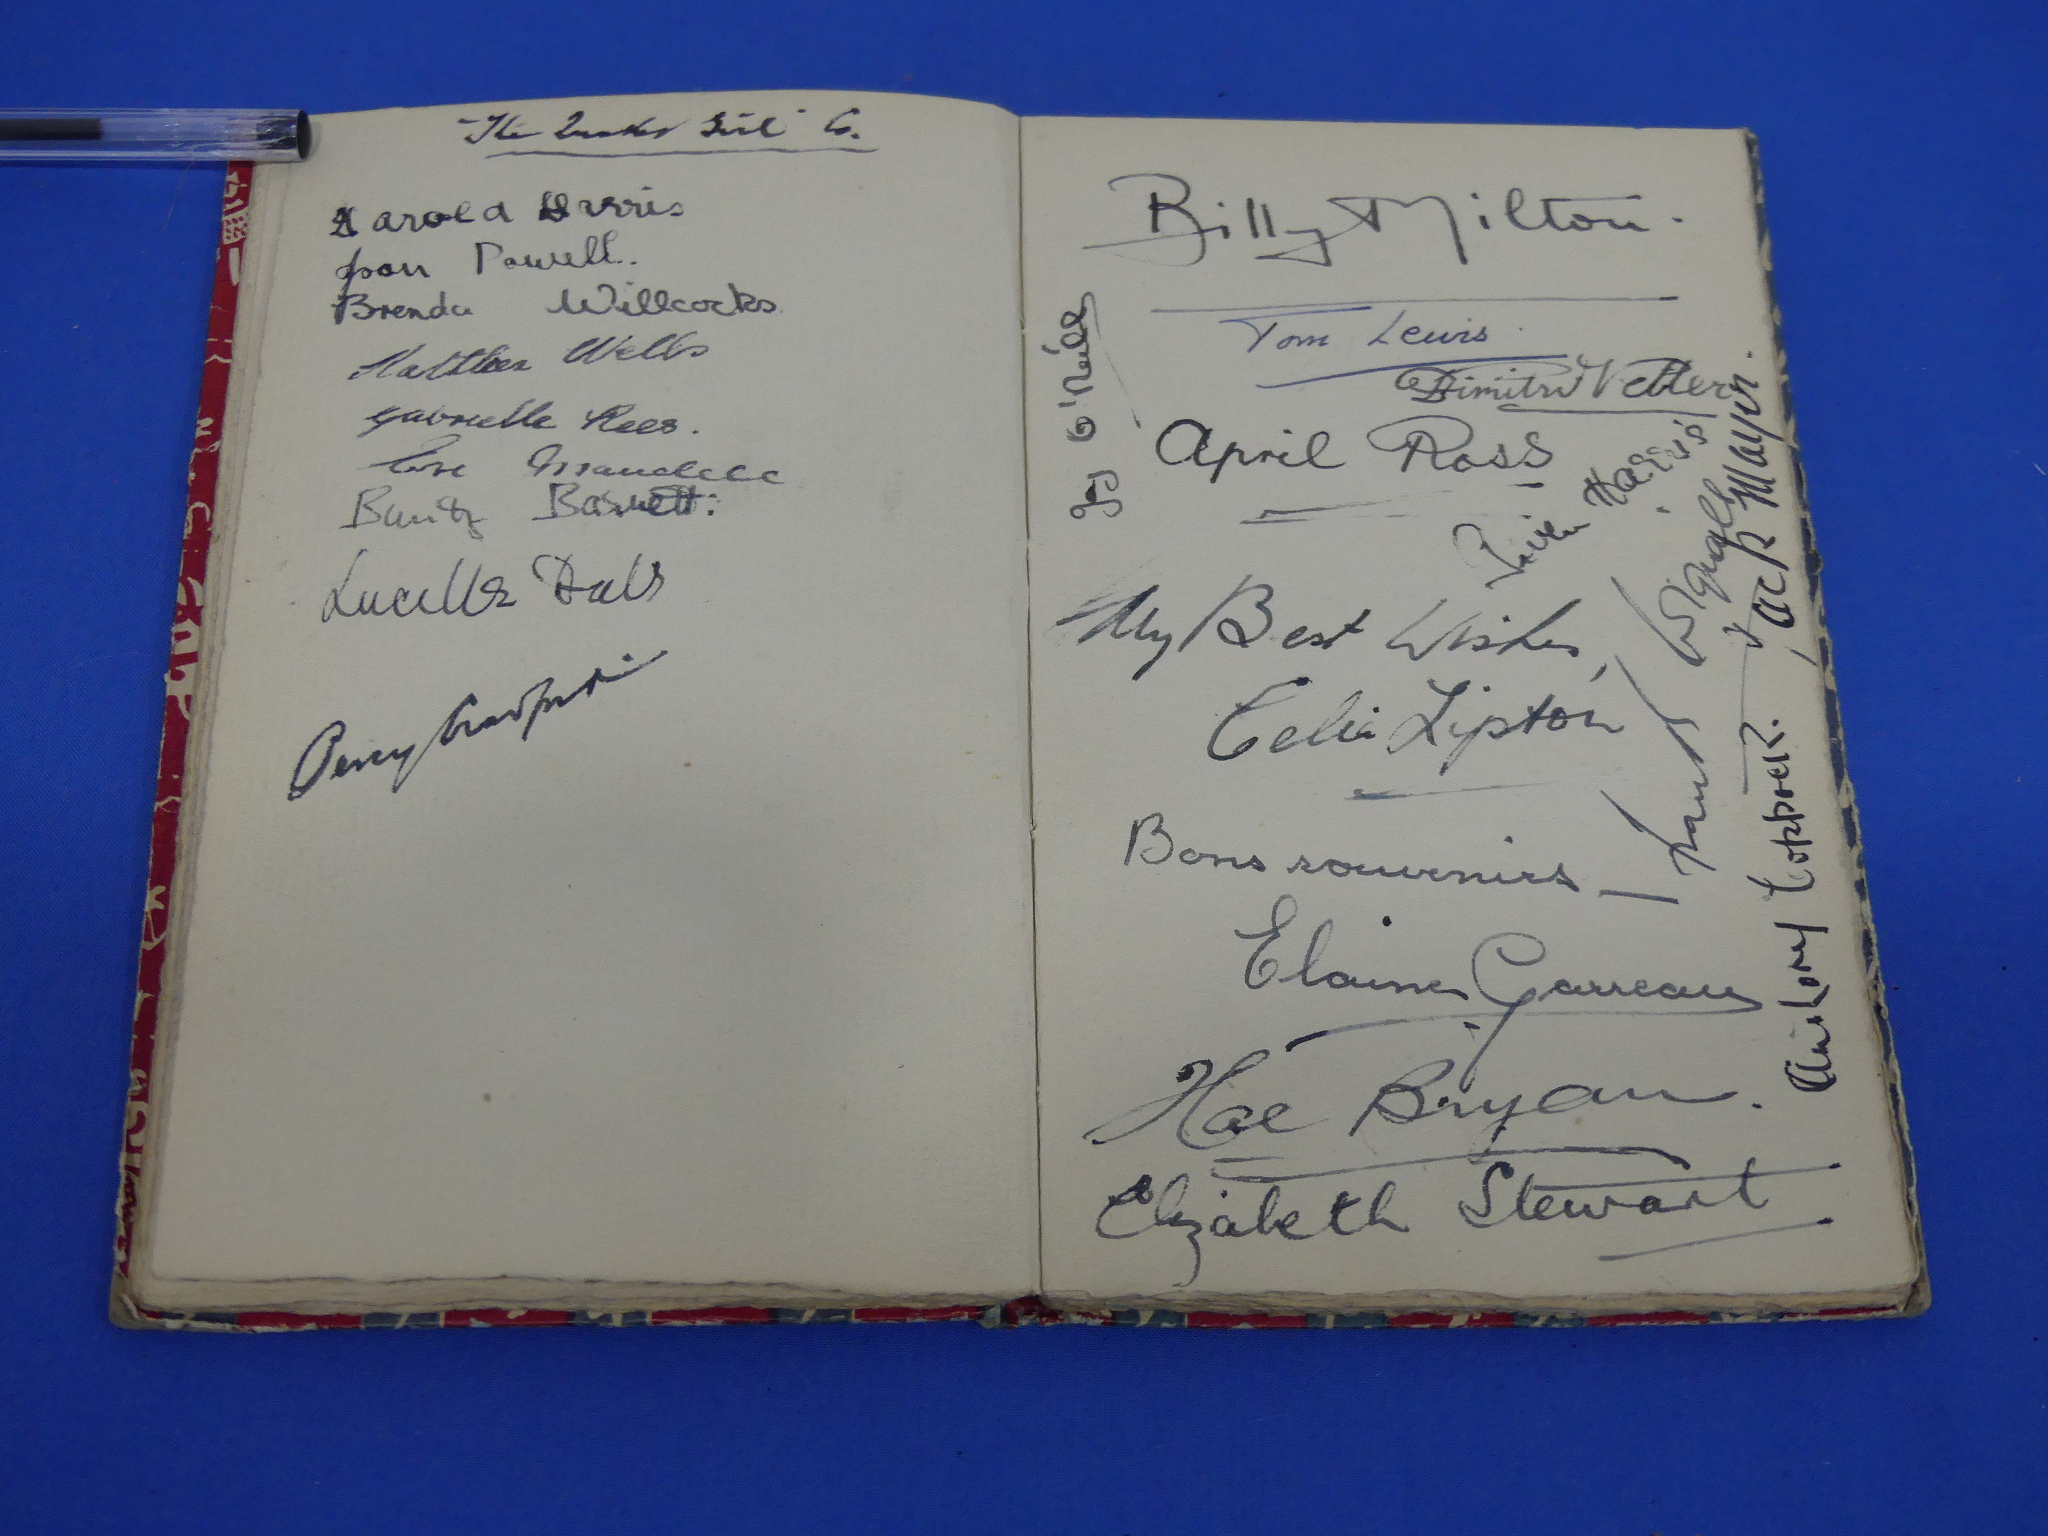 A 1940's theatrical and music hall Autograph Book, including Beryl Reid, Lucielle Ball (?), A